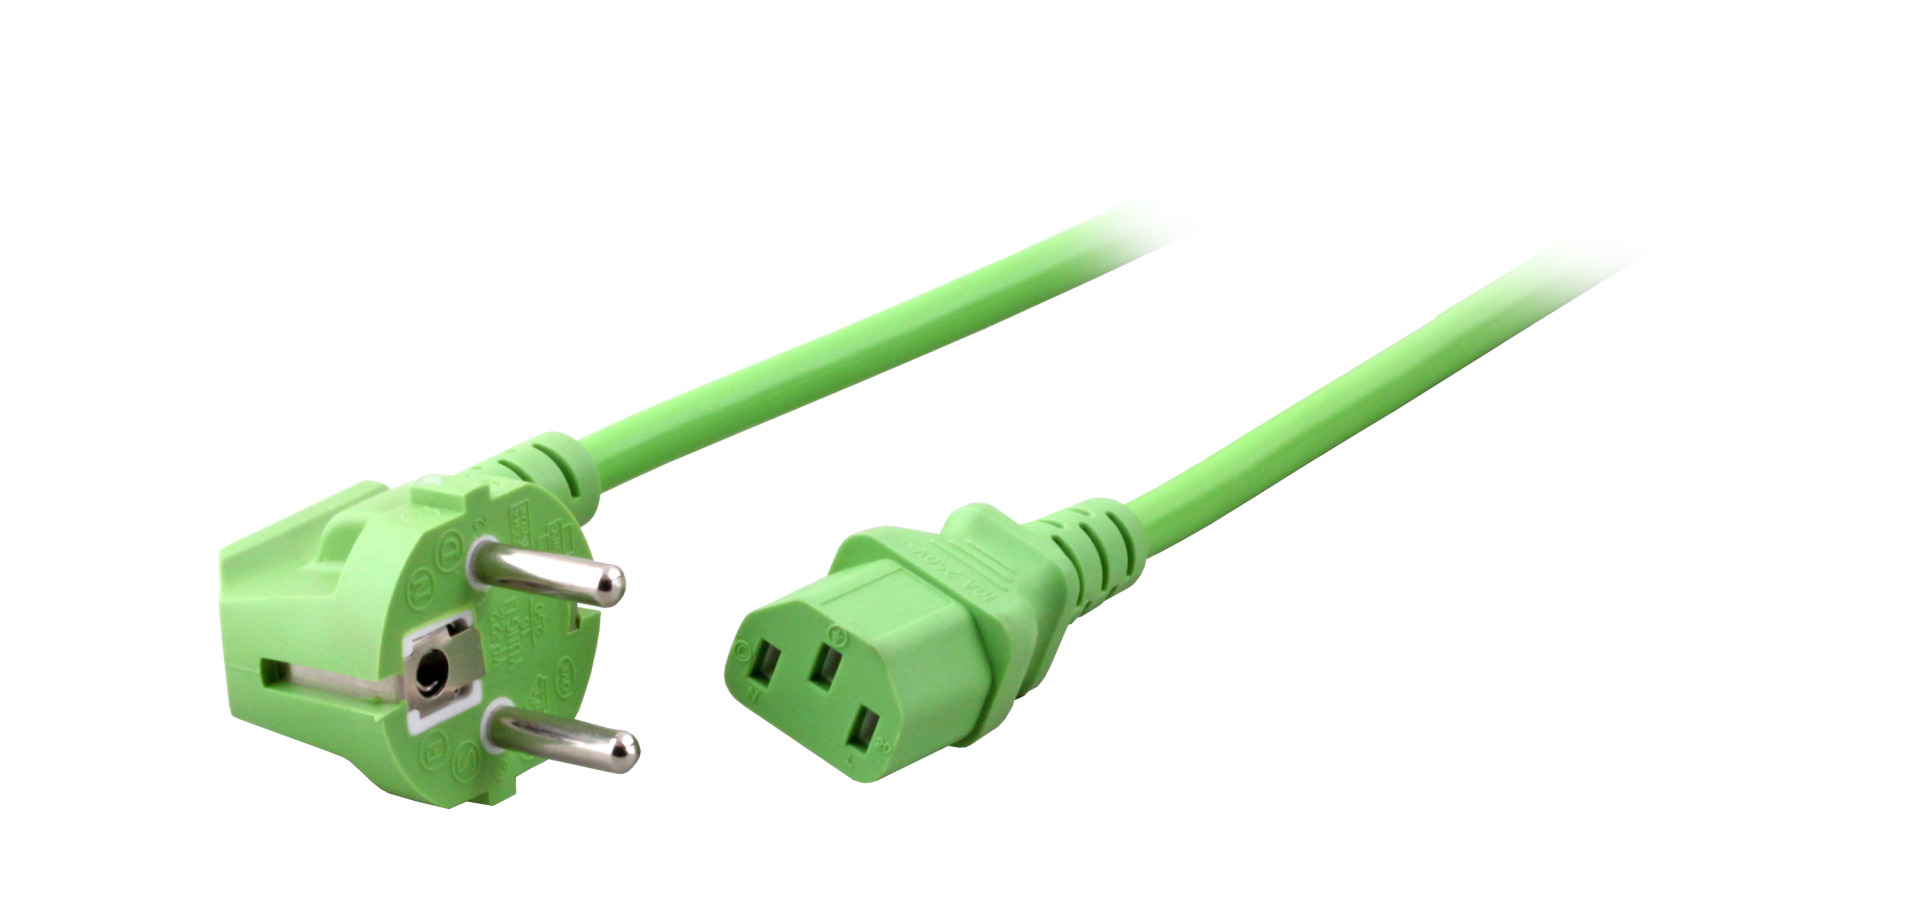 Power Cable CEE7/7 90° - C13 180°, Green, 3.0 m, 3 x 1.00 mm²